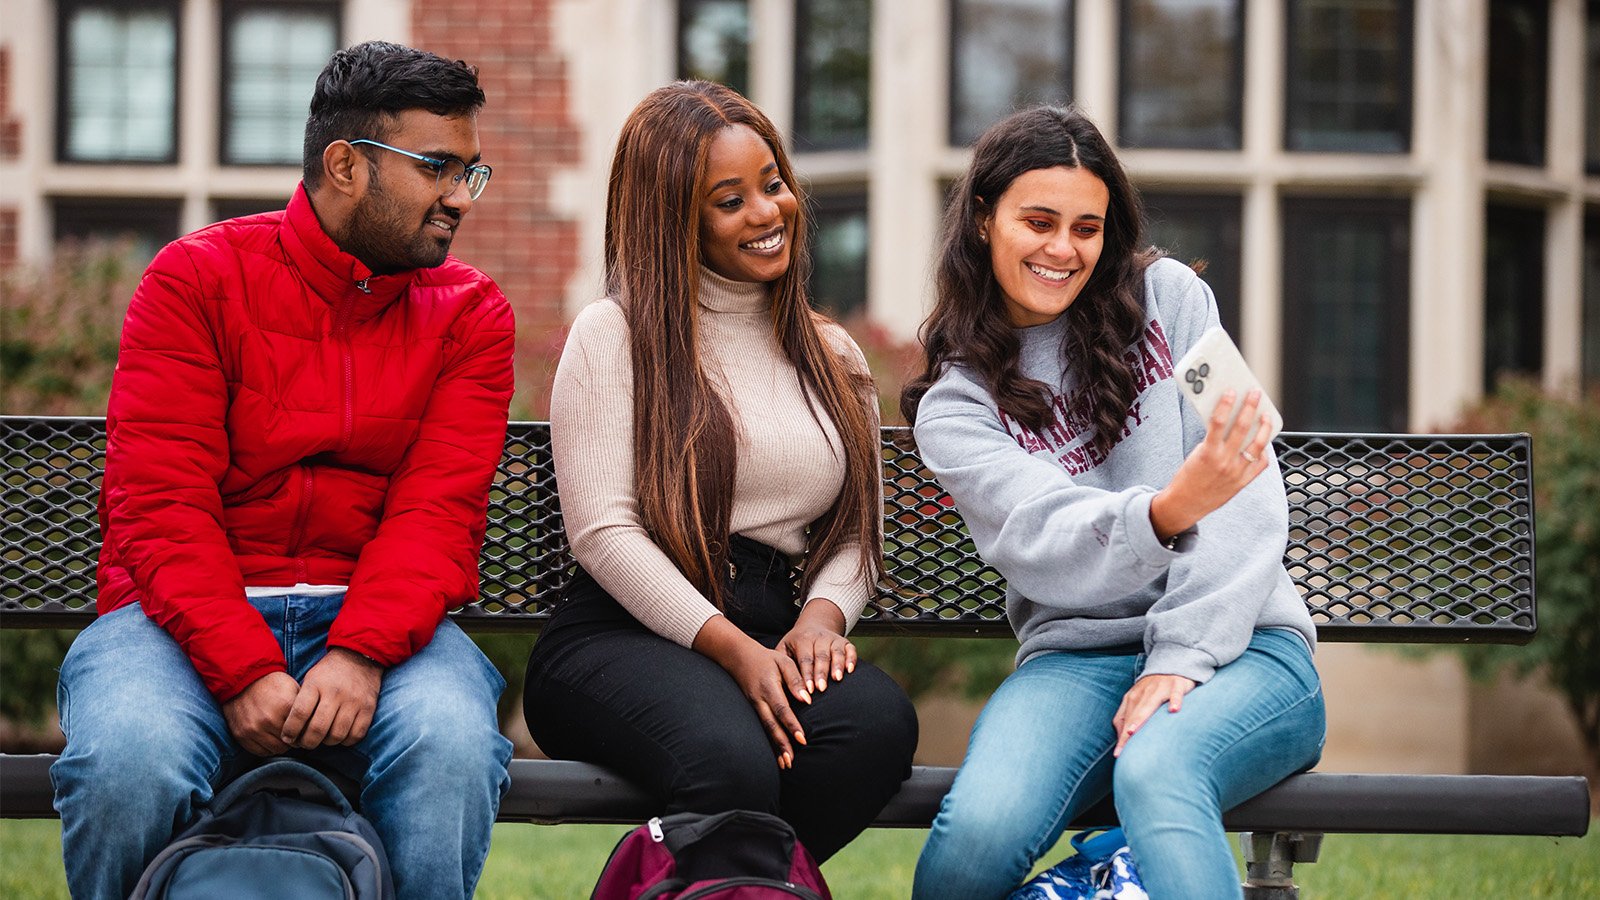 Three students sit on a campus bench together, smiling and posing for a selfie-style photo